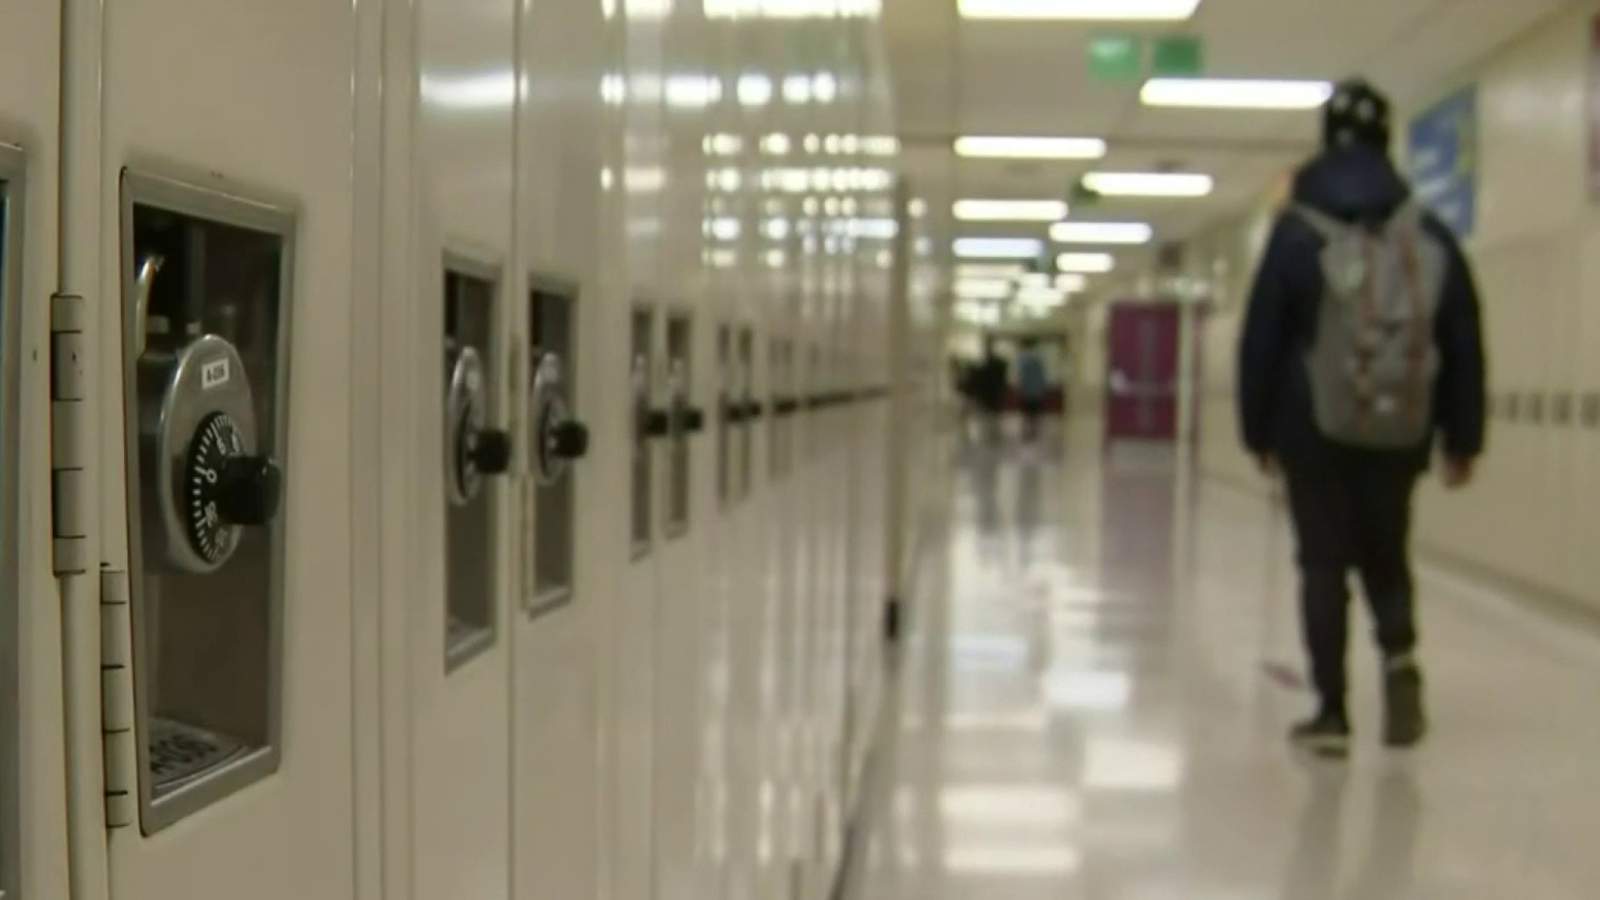 State superintendent wants to extend Michigan’s school year